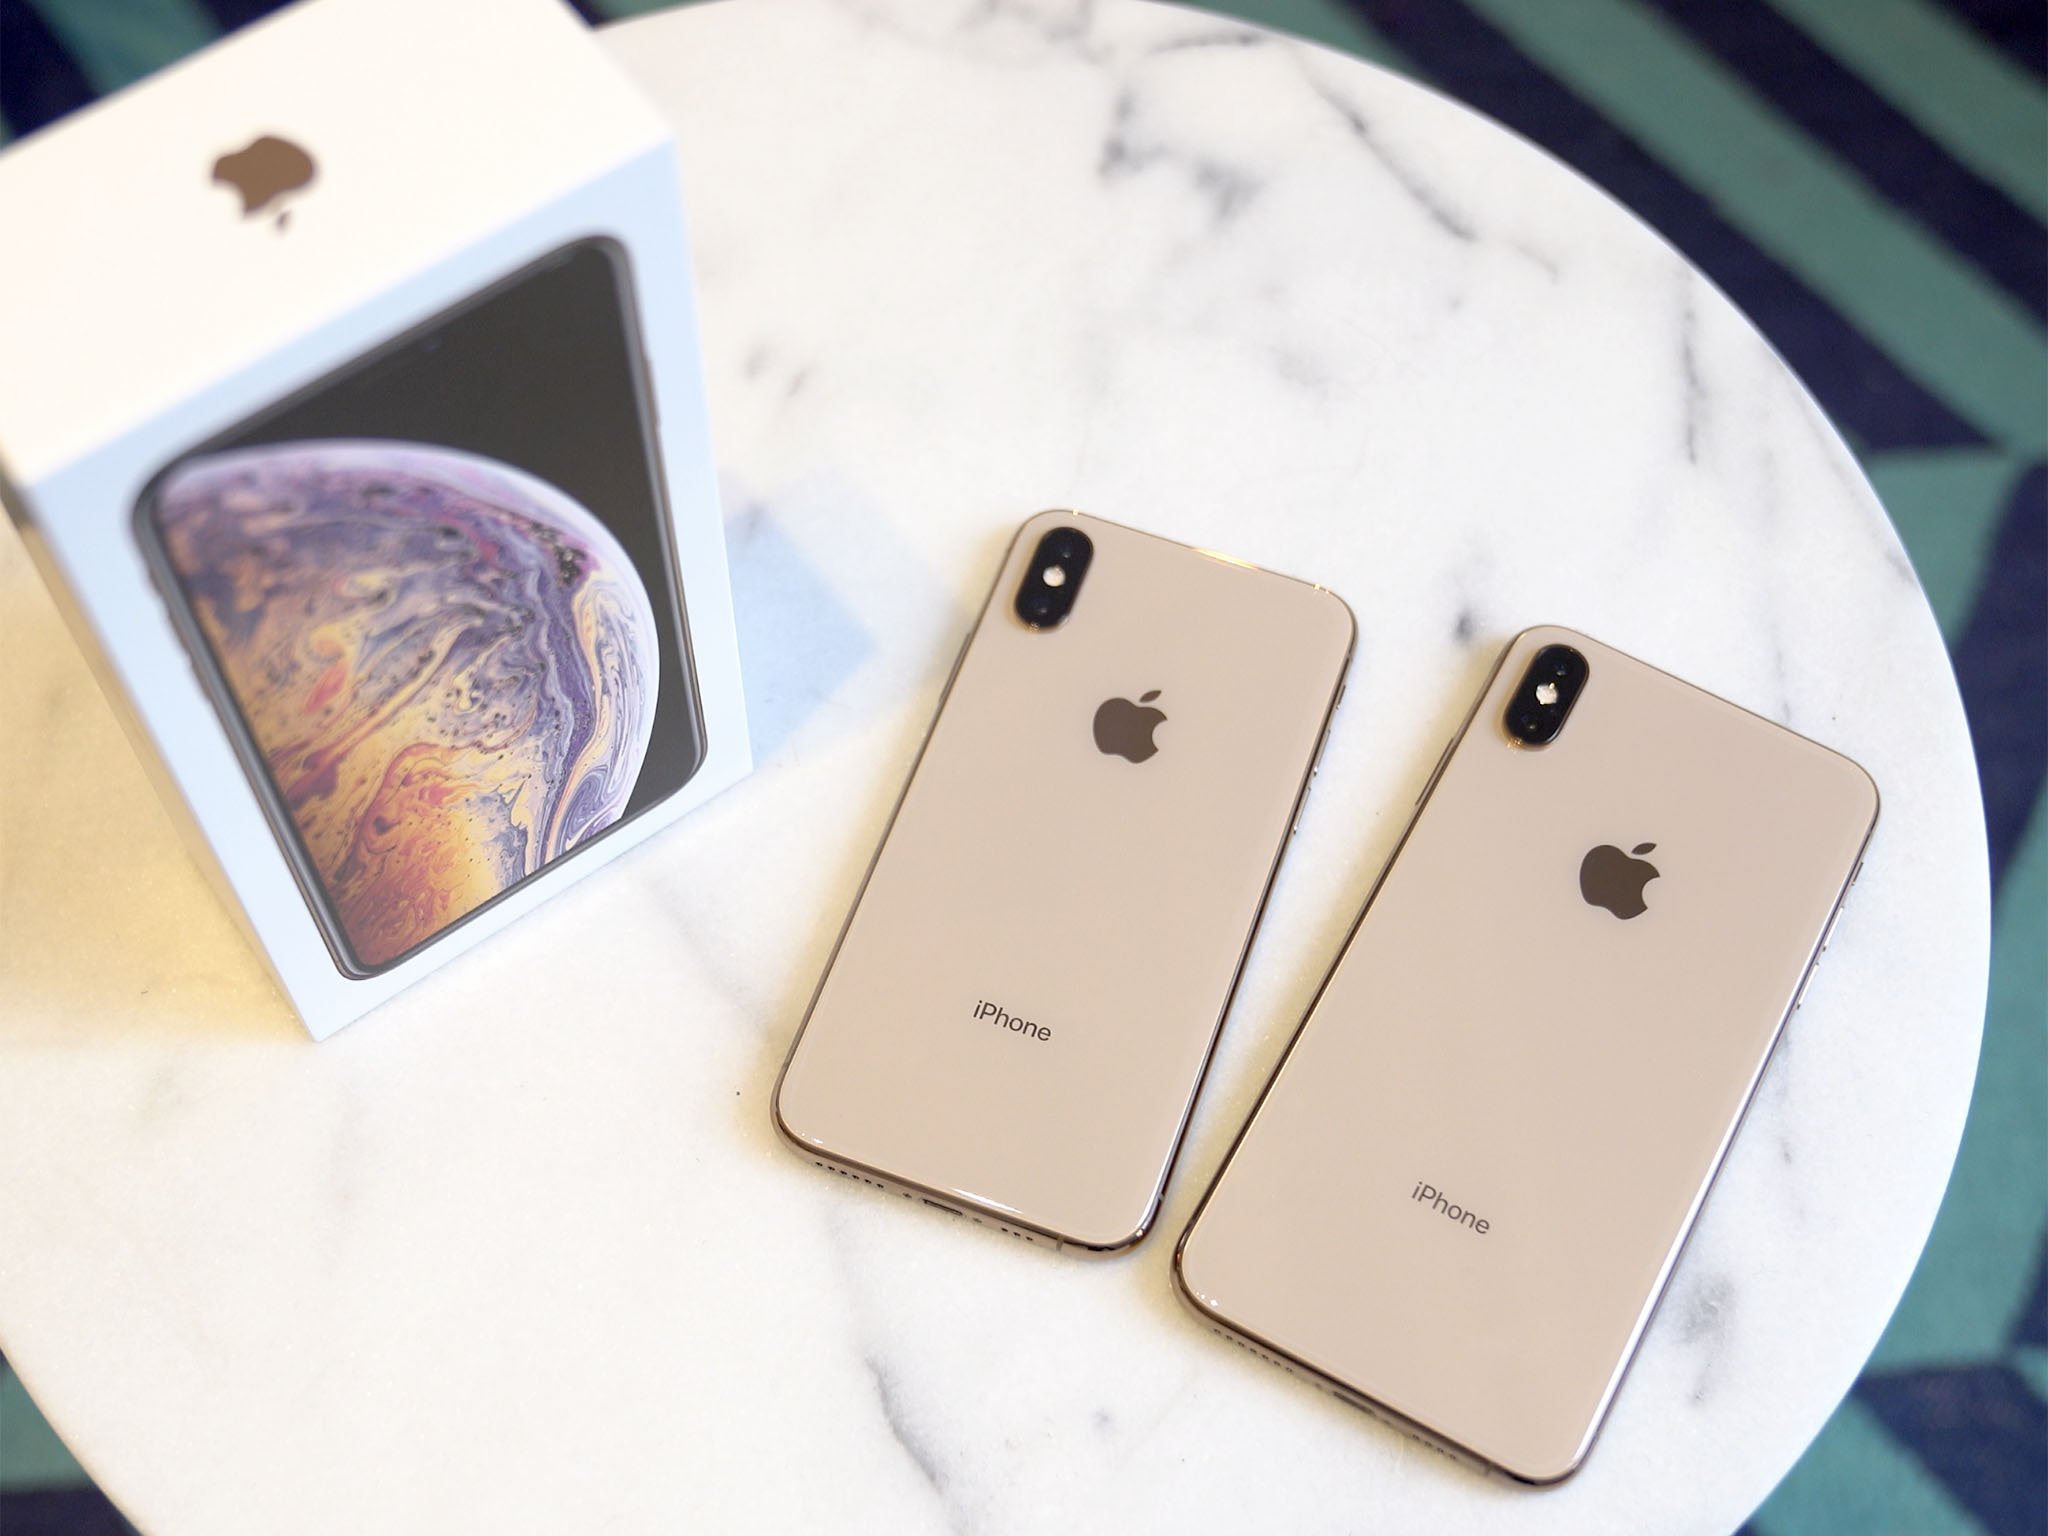 How to download iOS 13 public beta 1 to your iPhone